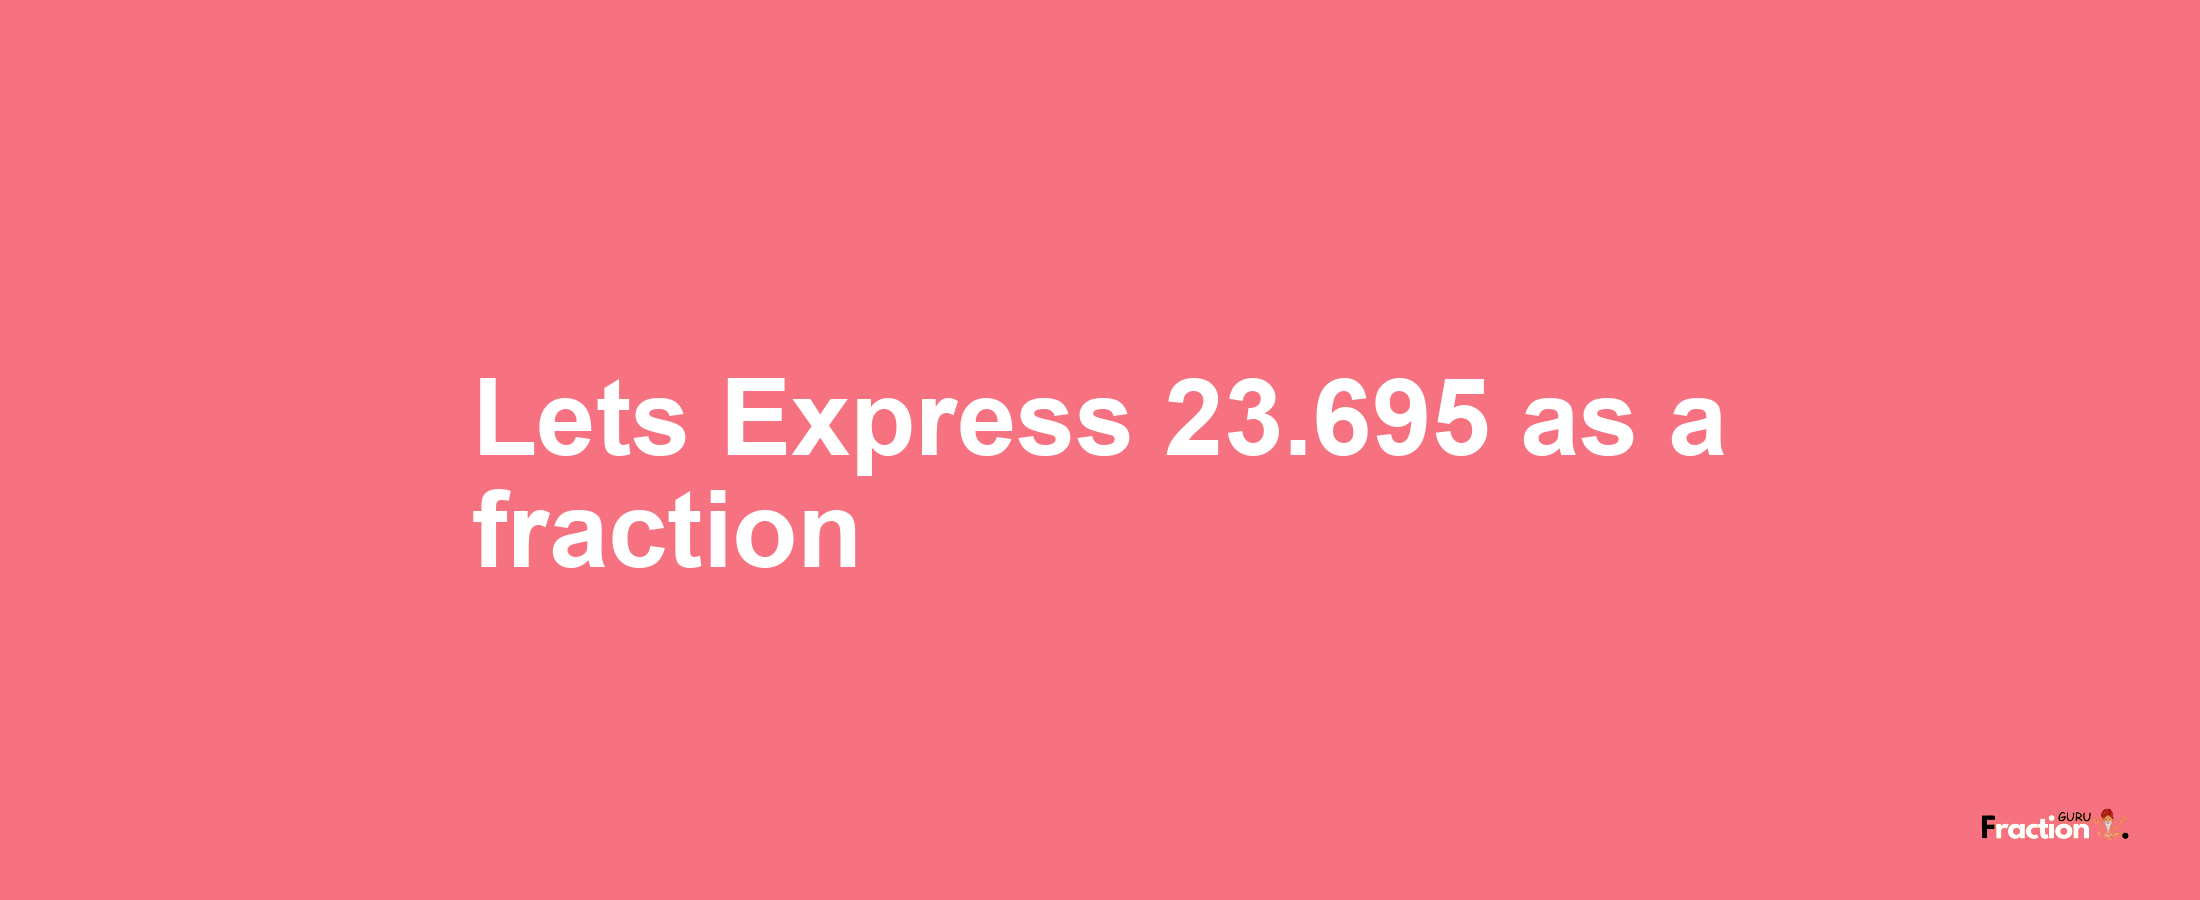 Lets Express 23.695 as afraction